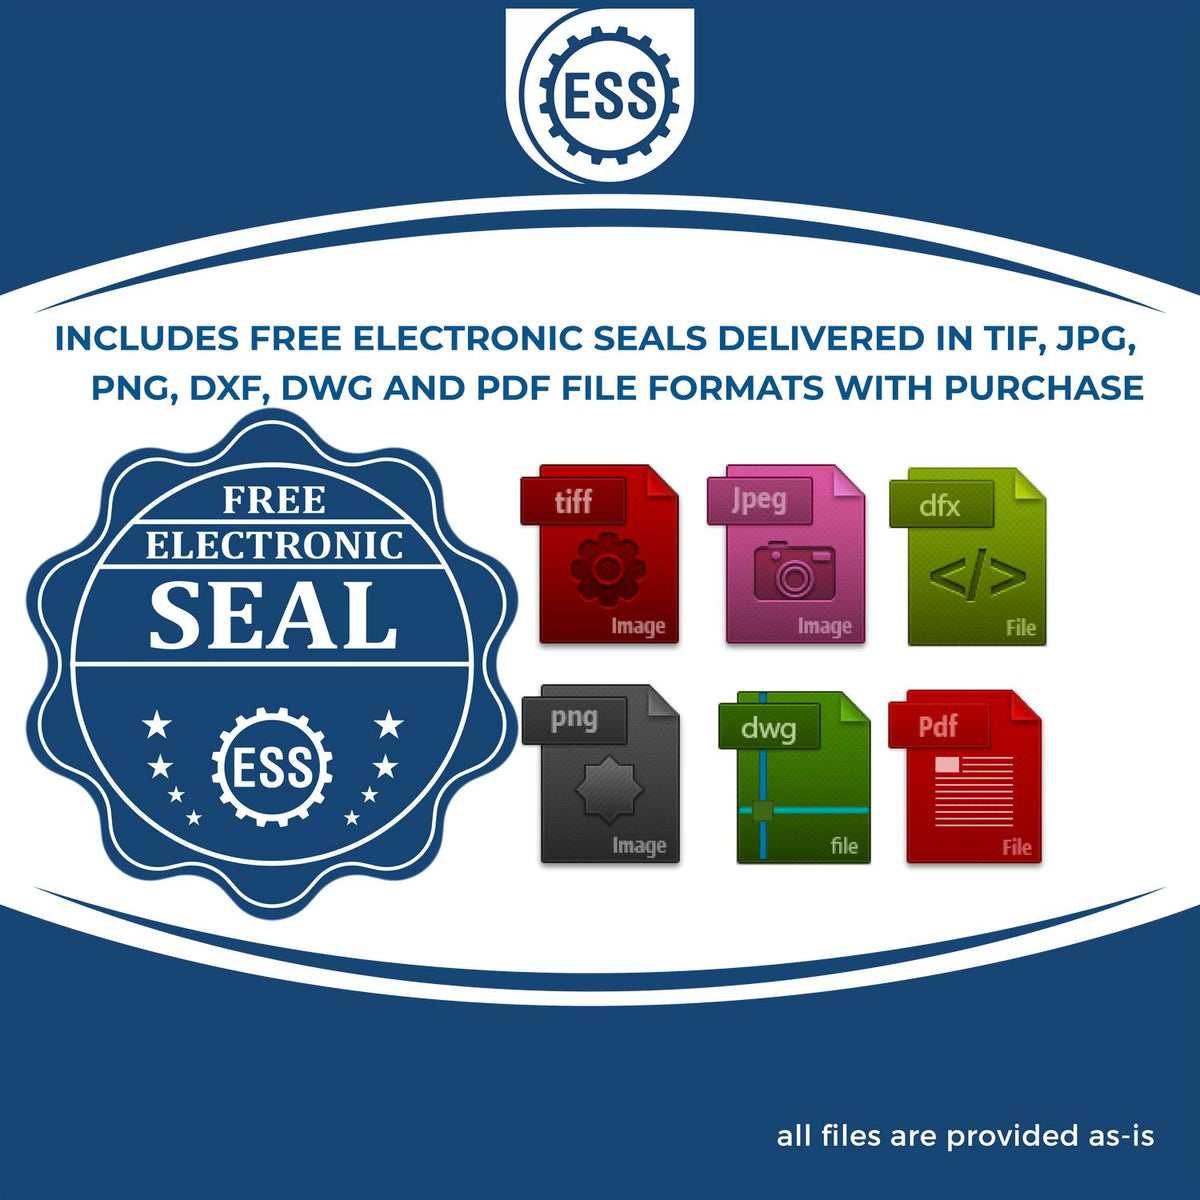 An infographic for the free electronic seal for the Slim Pre-Inked South Dakota Architect Seal Stamp illustrating the different file type icons such as DXF, DWG, TIF, JPG and PNG.